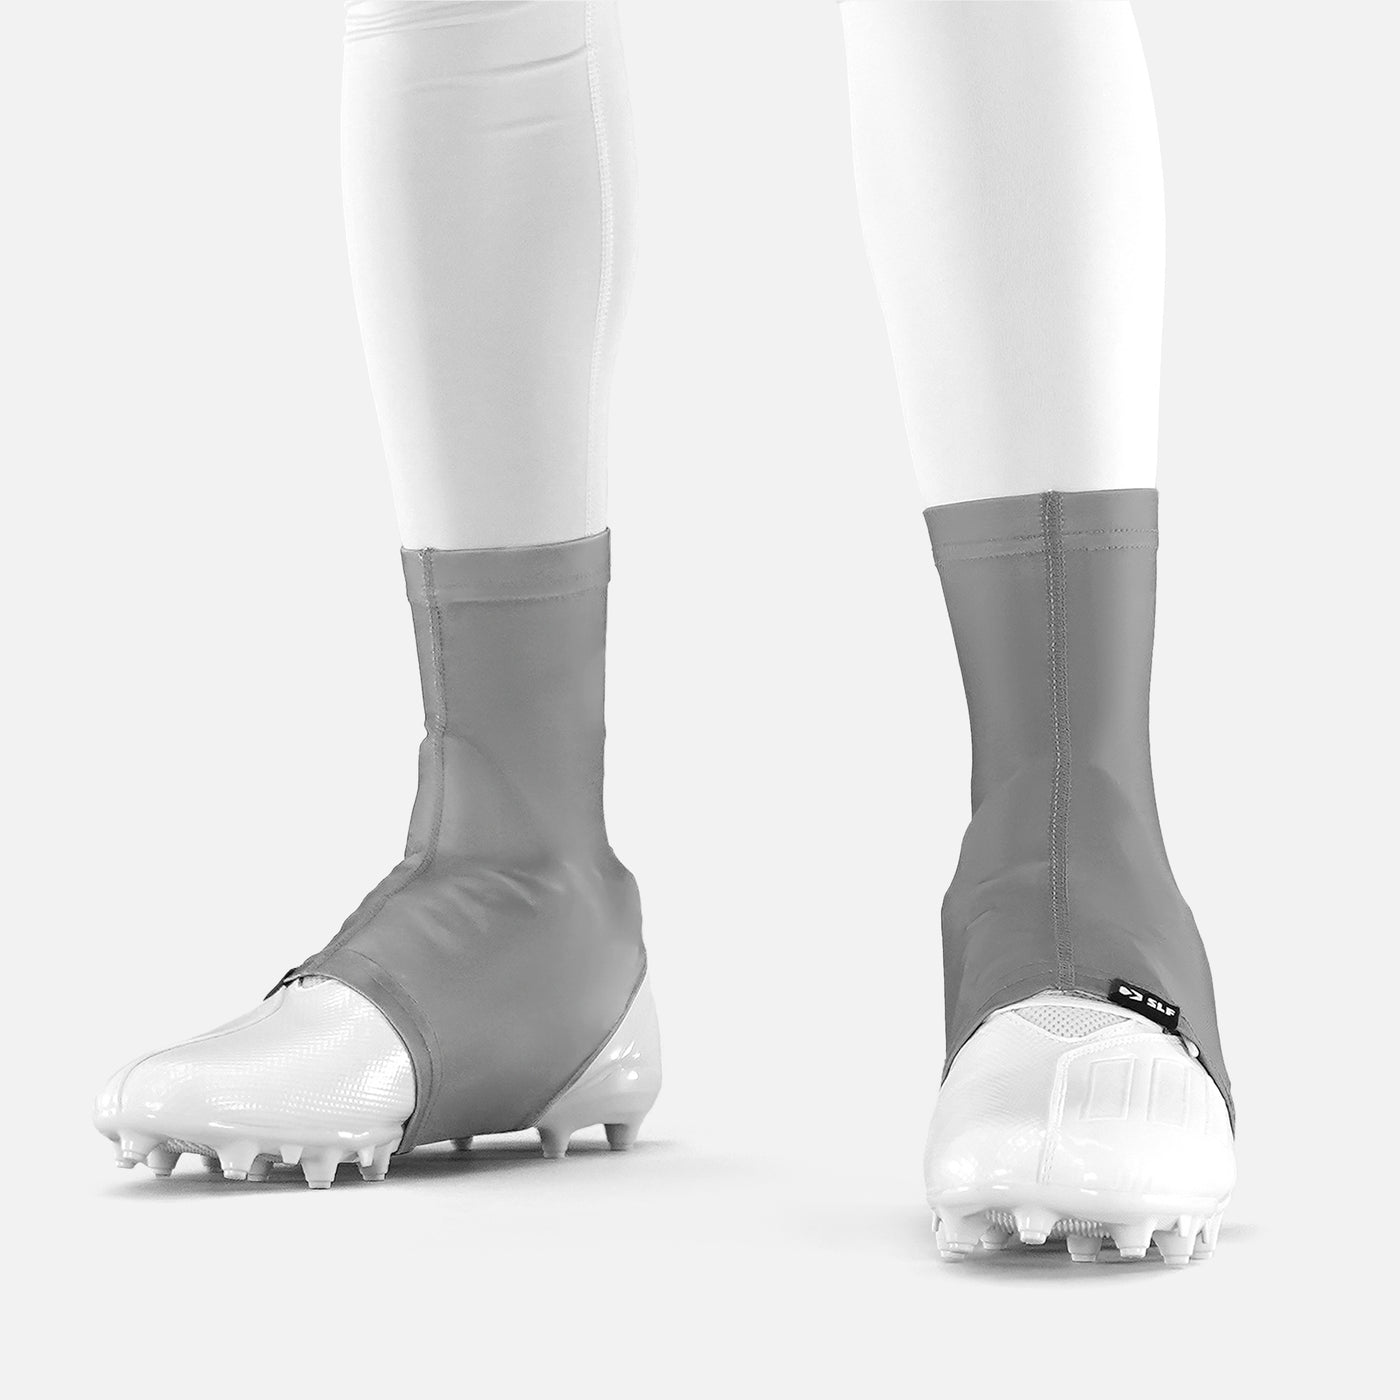 Hue Gray Spats / Cleat Covers